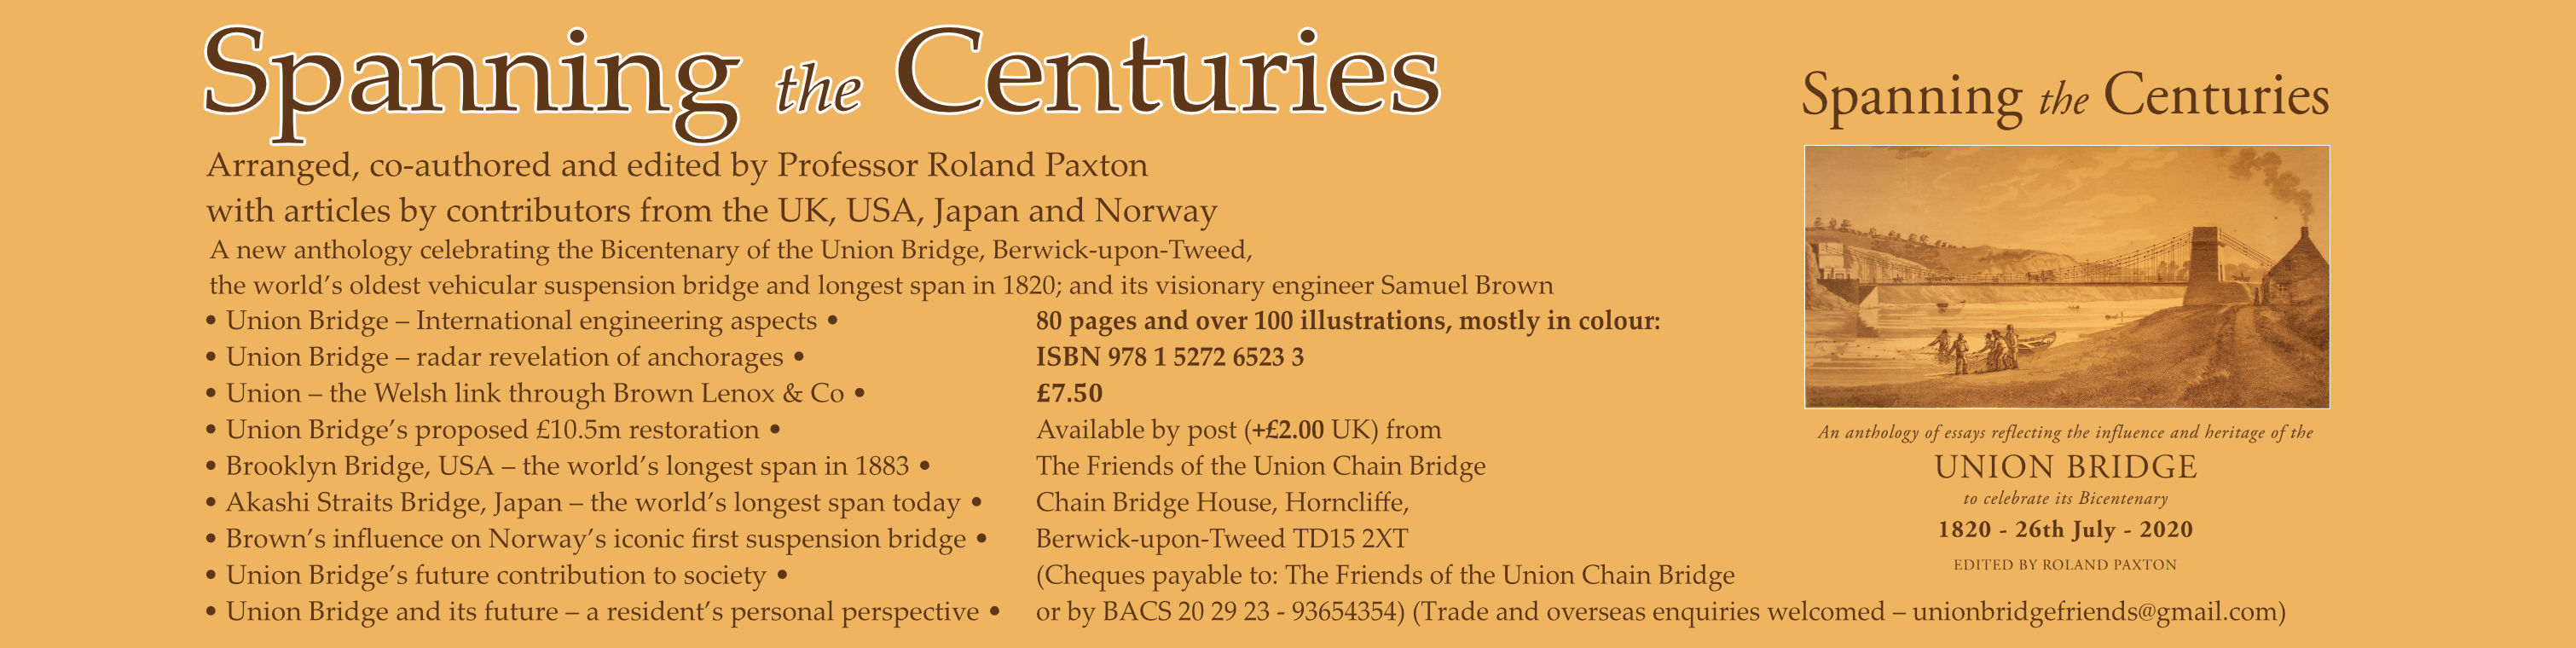 "Spanning the Centuries" A new anthology celebrating the Bicentenary of the Union Bridge, Berwick-upon-Tweed, the world’s oldest vehicular suspension bridge and longest span in 1820; and its visionary engineer Samuel Brown.